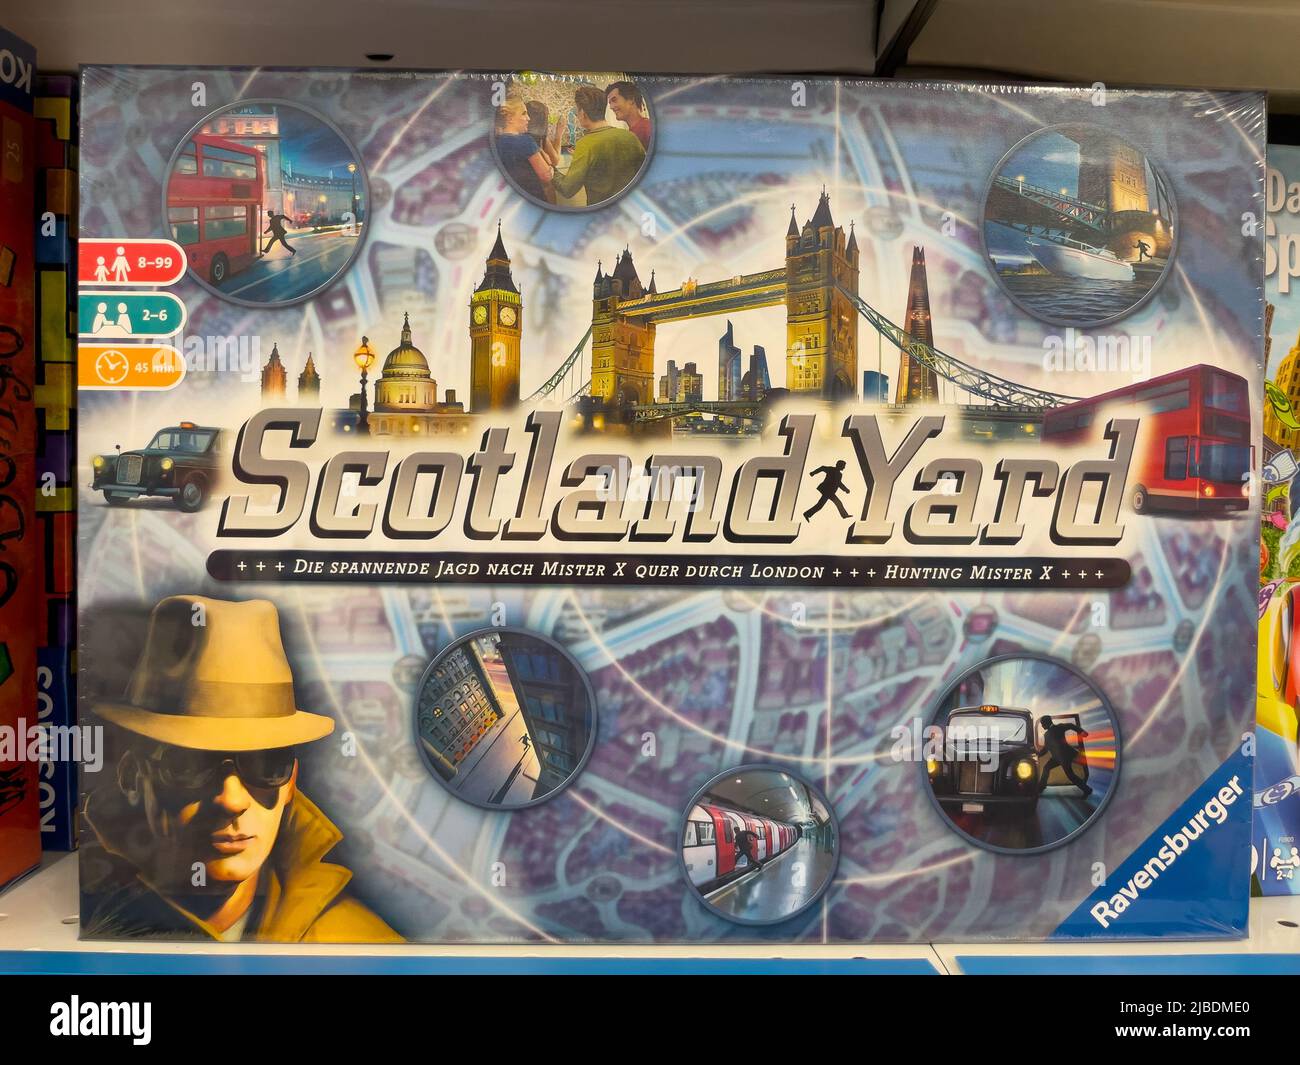 Nuremberg, Germany - June 4, 2022: Ravensburger Scotland Yard Boardgame at Supermarket. Ravensburger produces games and toys since 1833 in Germany. Stock Photo